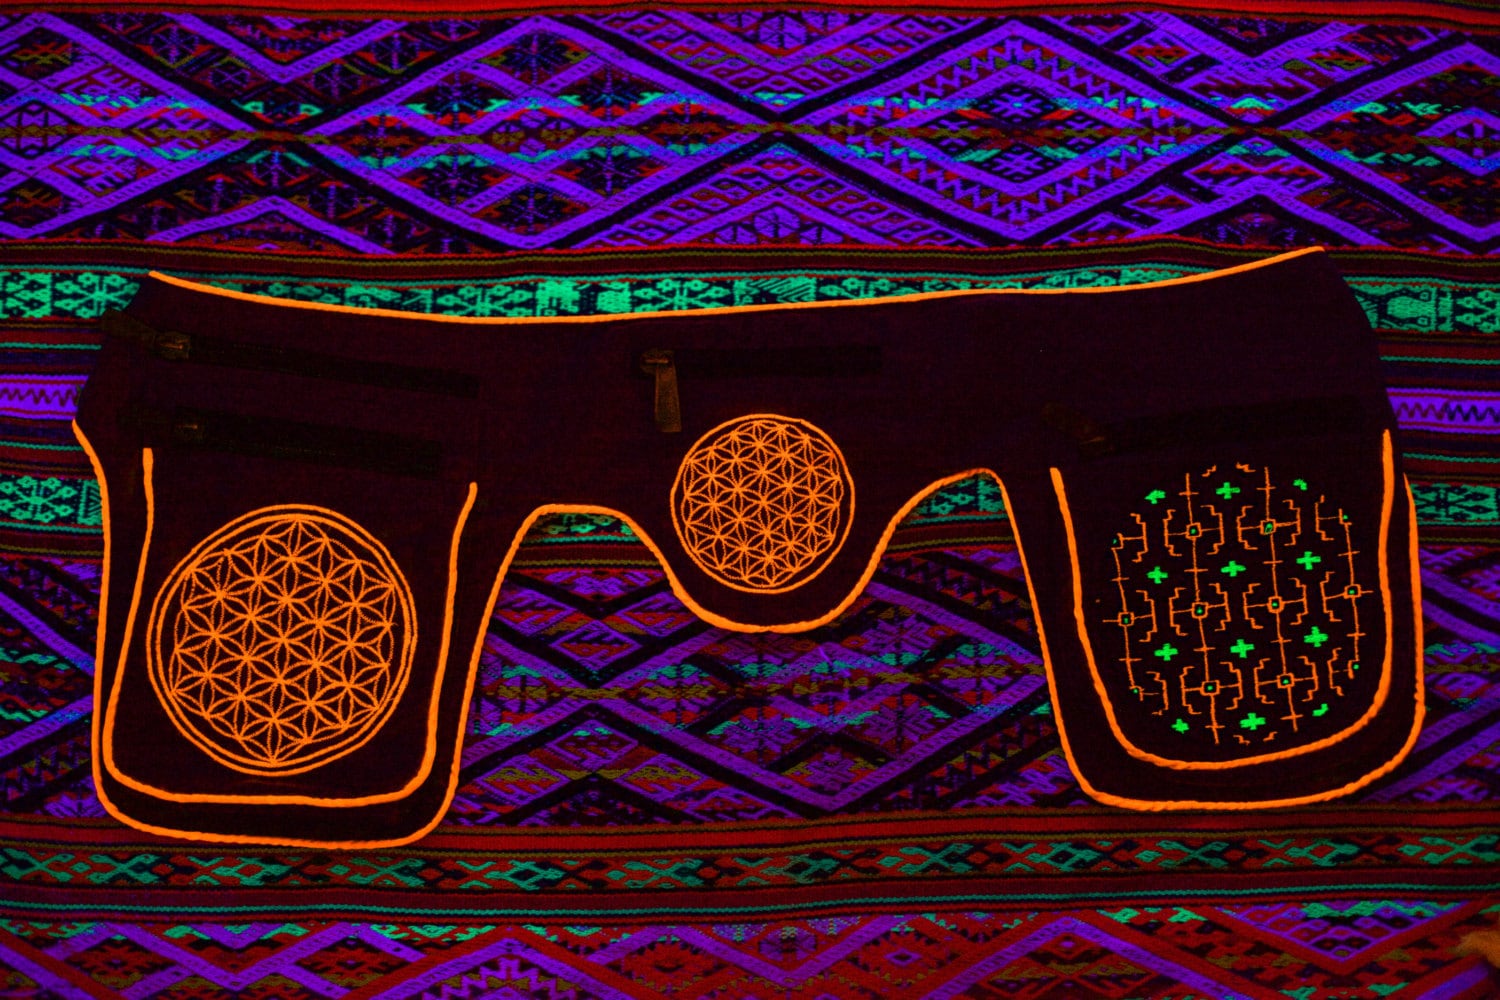 Beltbag Purple Ayahuasca - 7 pockets, strong ziplocks, size adjustable with hook & loop and clip - blacklight active lines flower of life